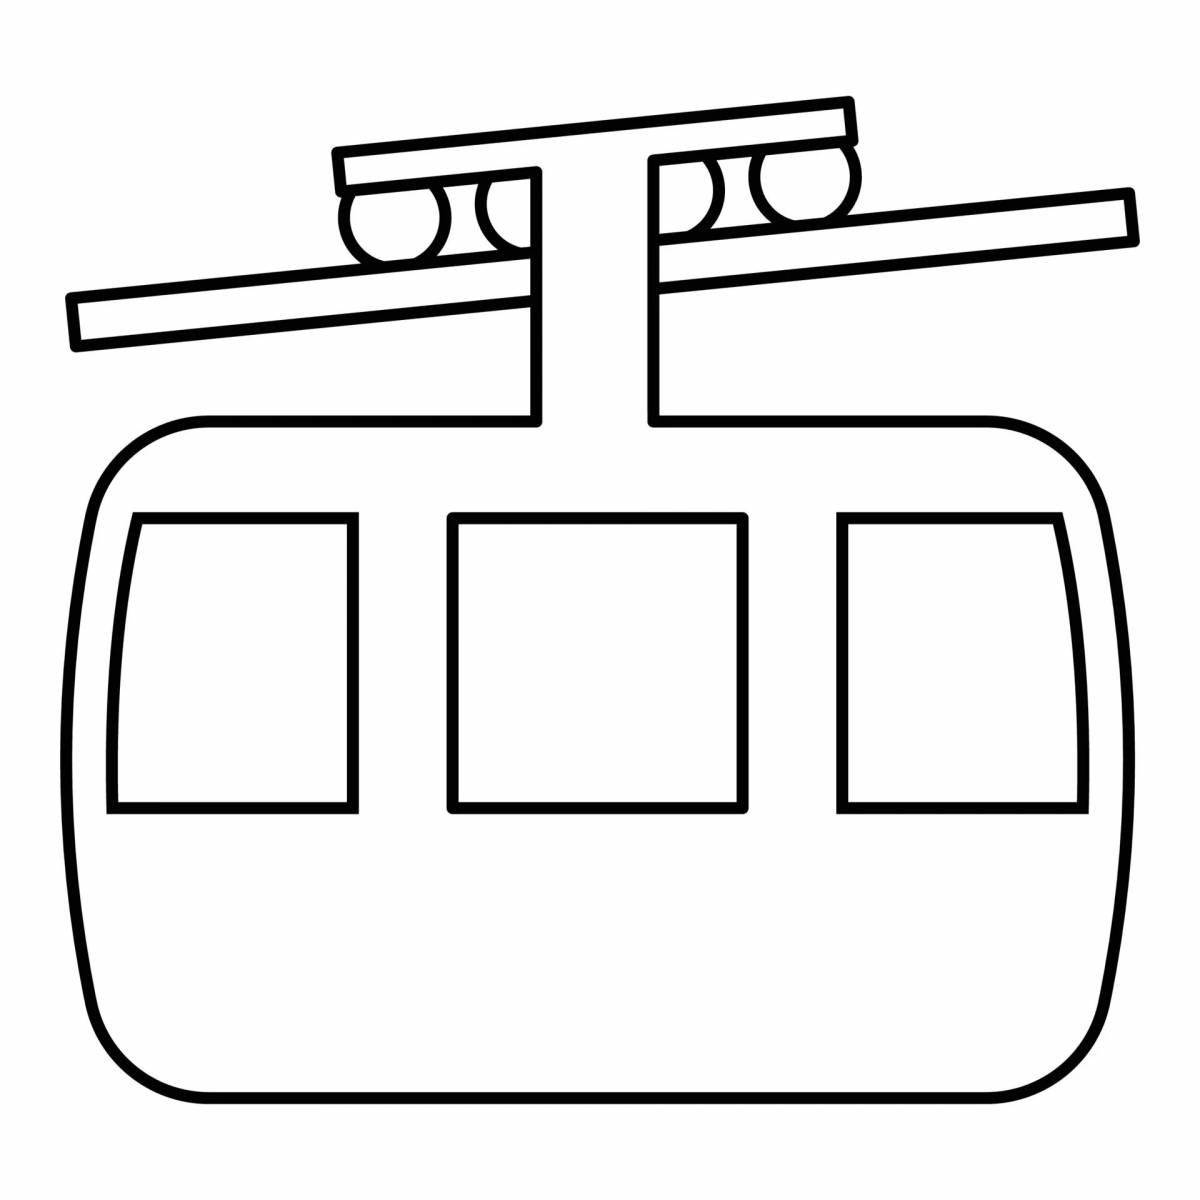 Charming cable car coloring page